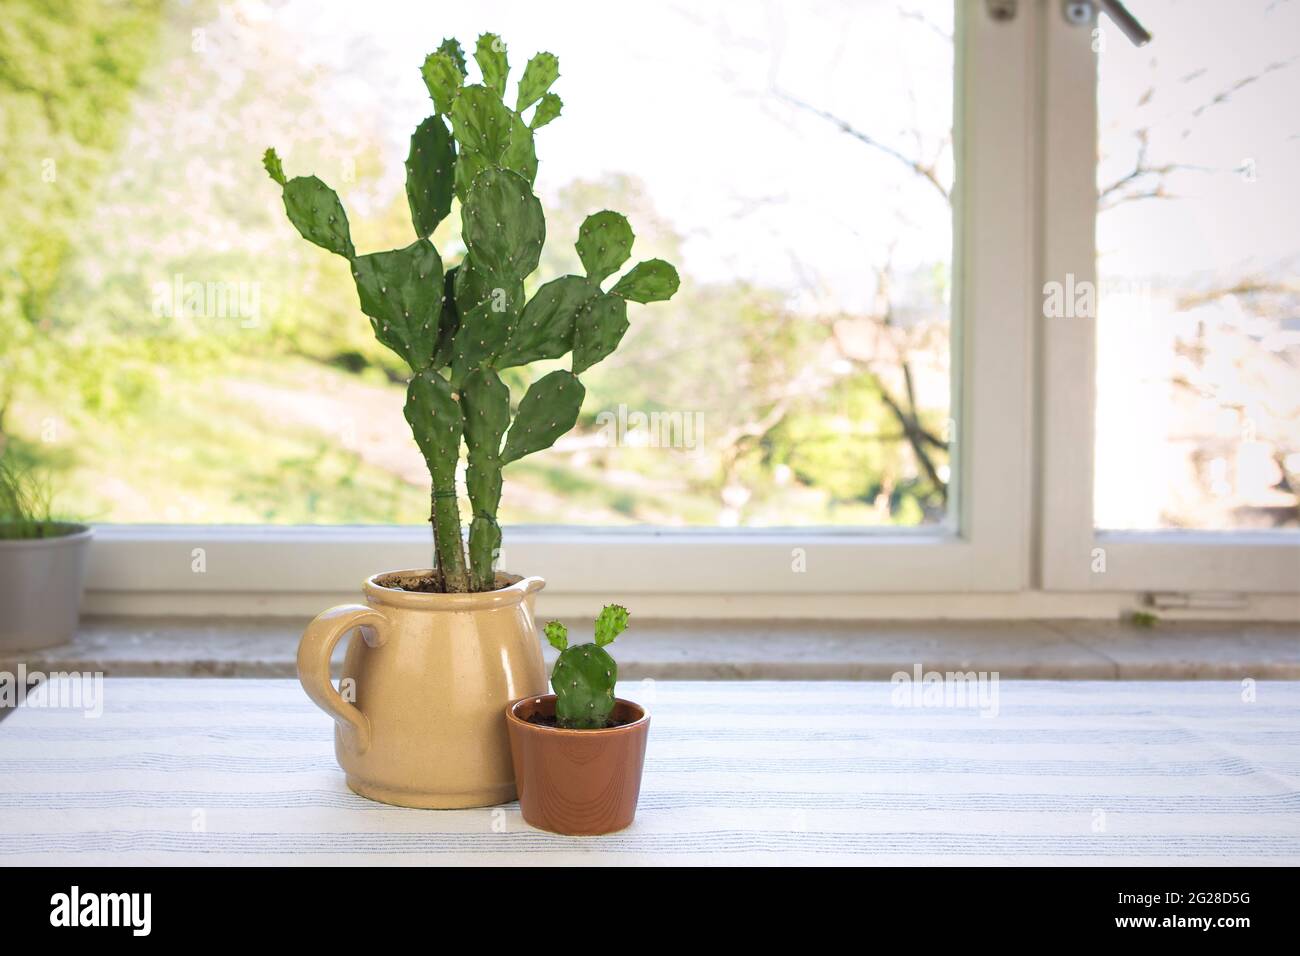 Big and small cactus in flower pot. Opuntia ficus-indica, prickly pear or Indian fig. Two cacti house plants on the table by the window. Stock Photo